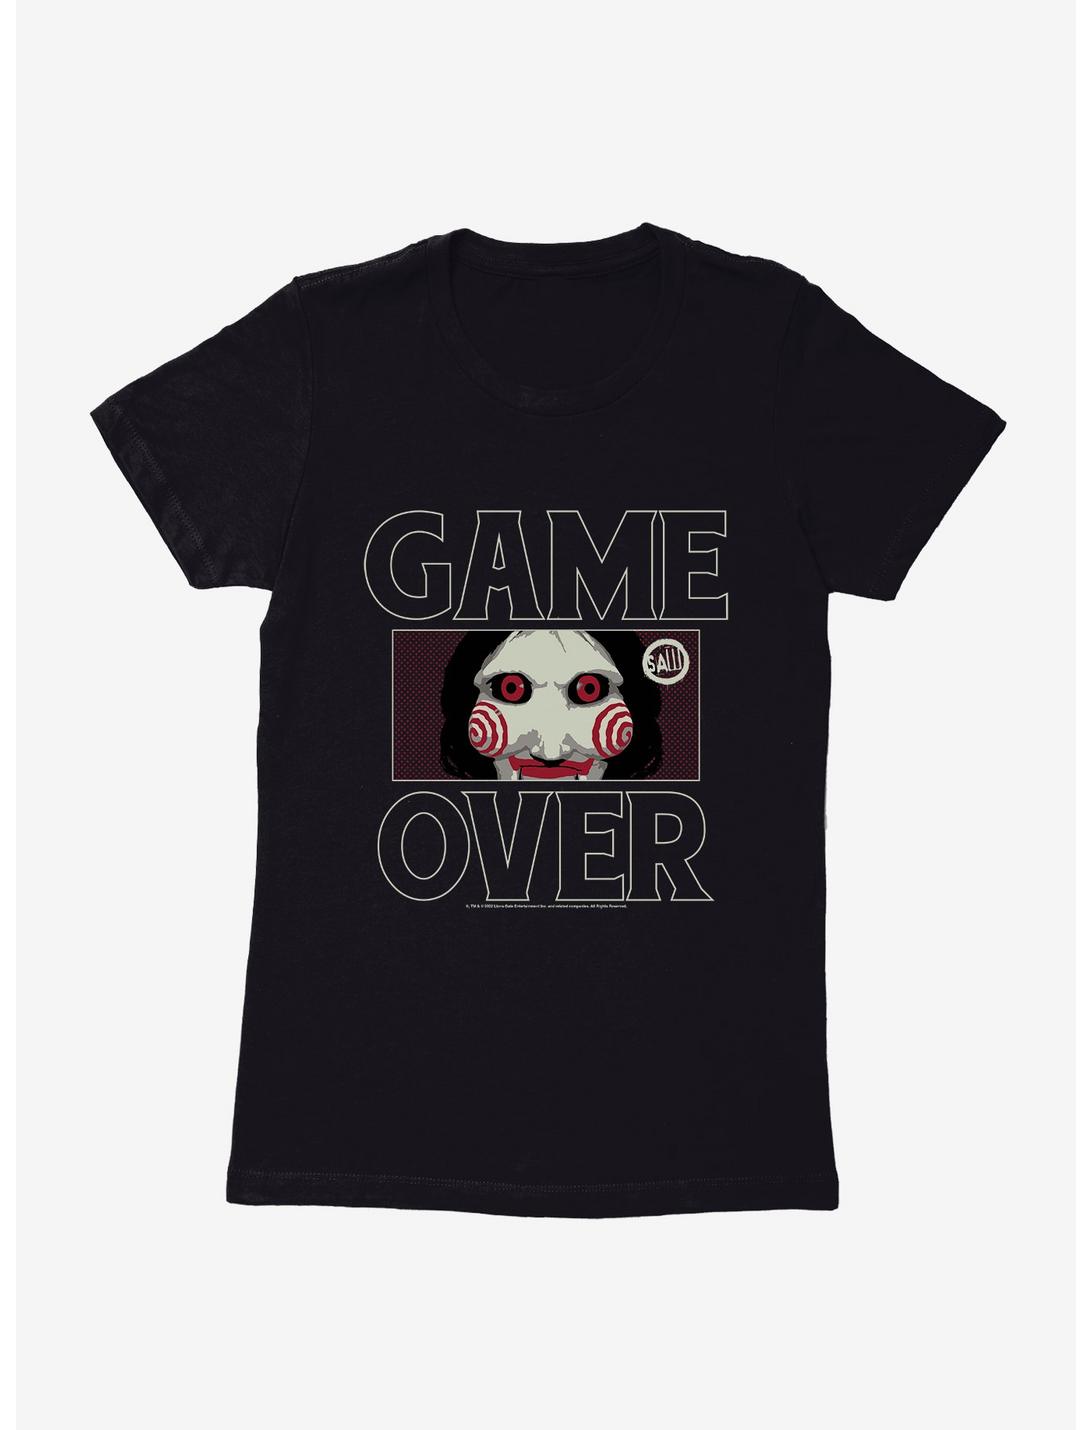 Saw Game Over Womens T-Shirt, BLACK, hi-res